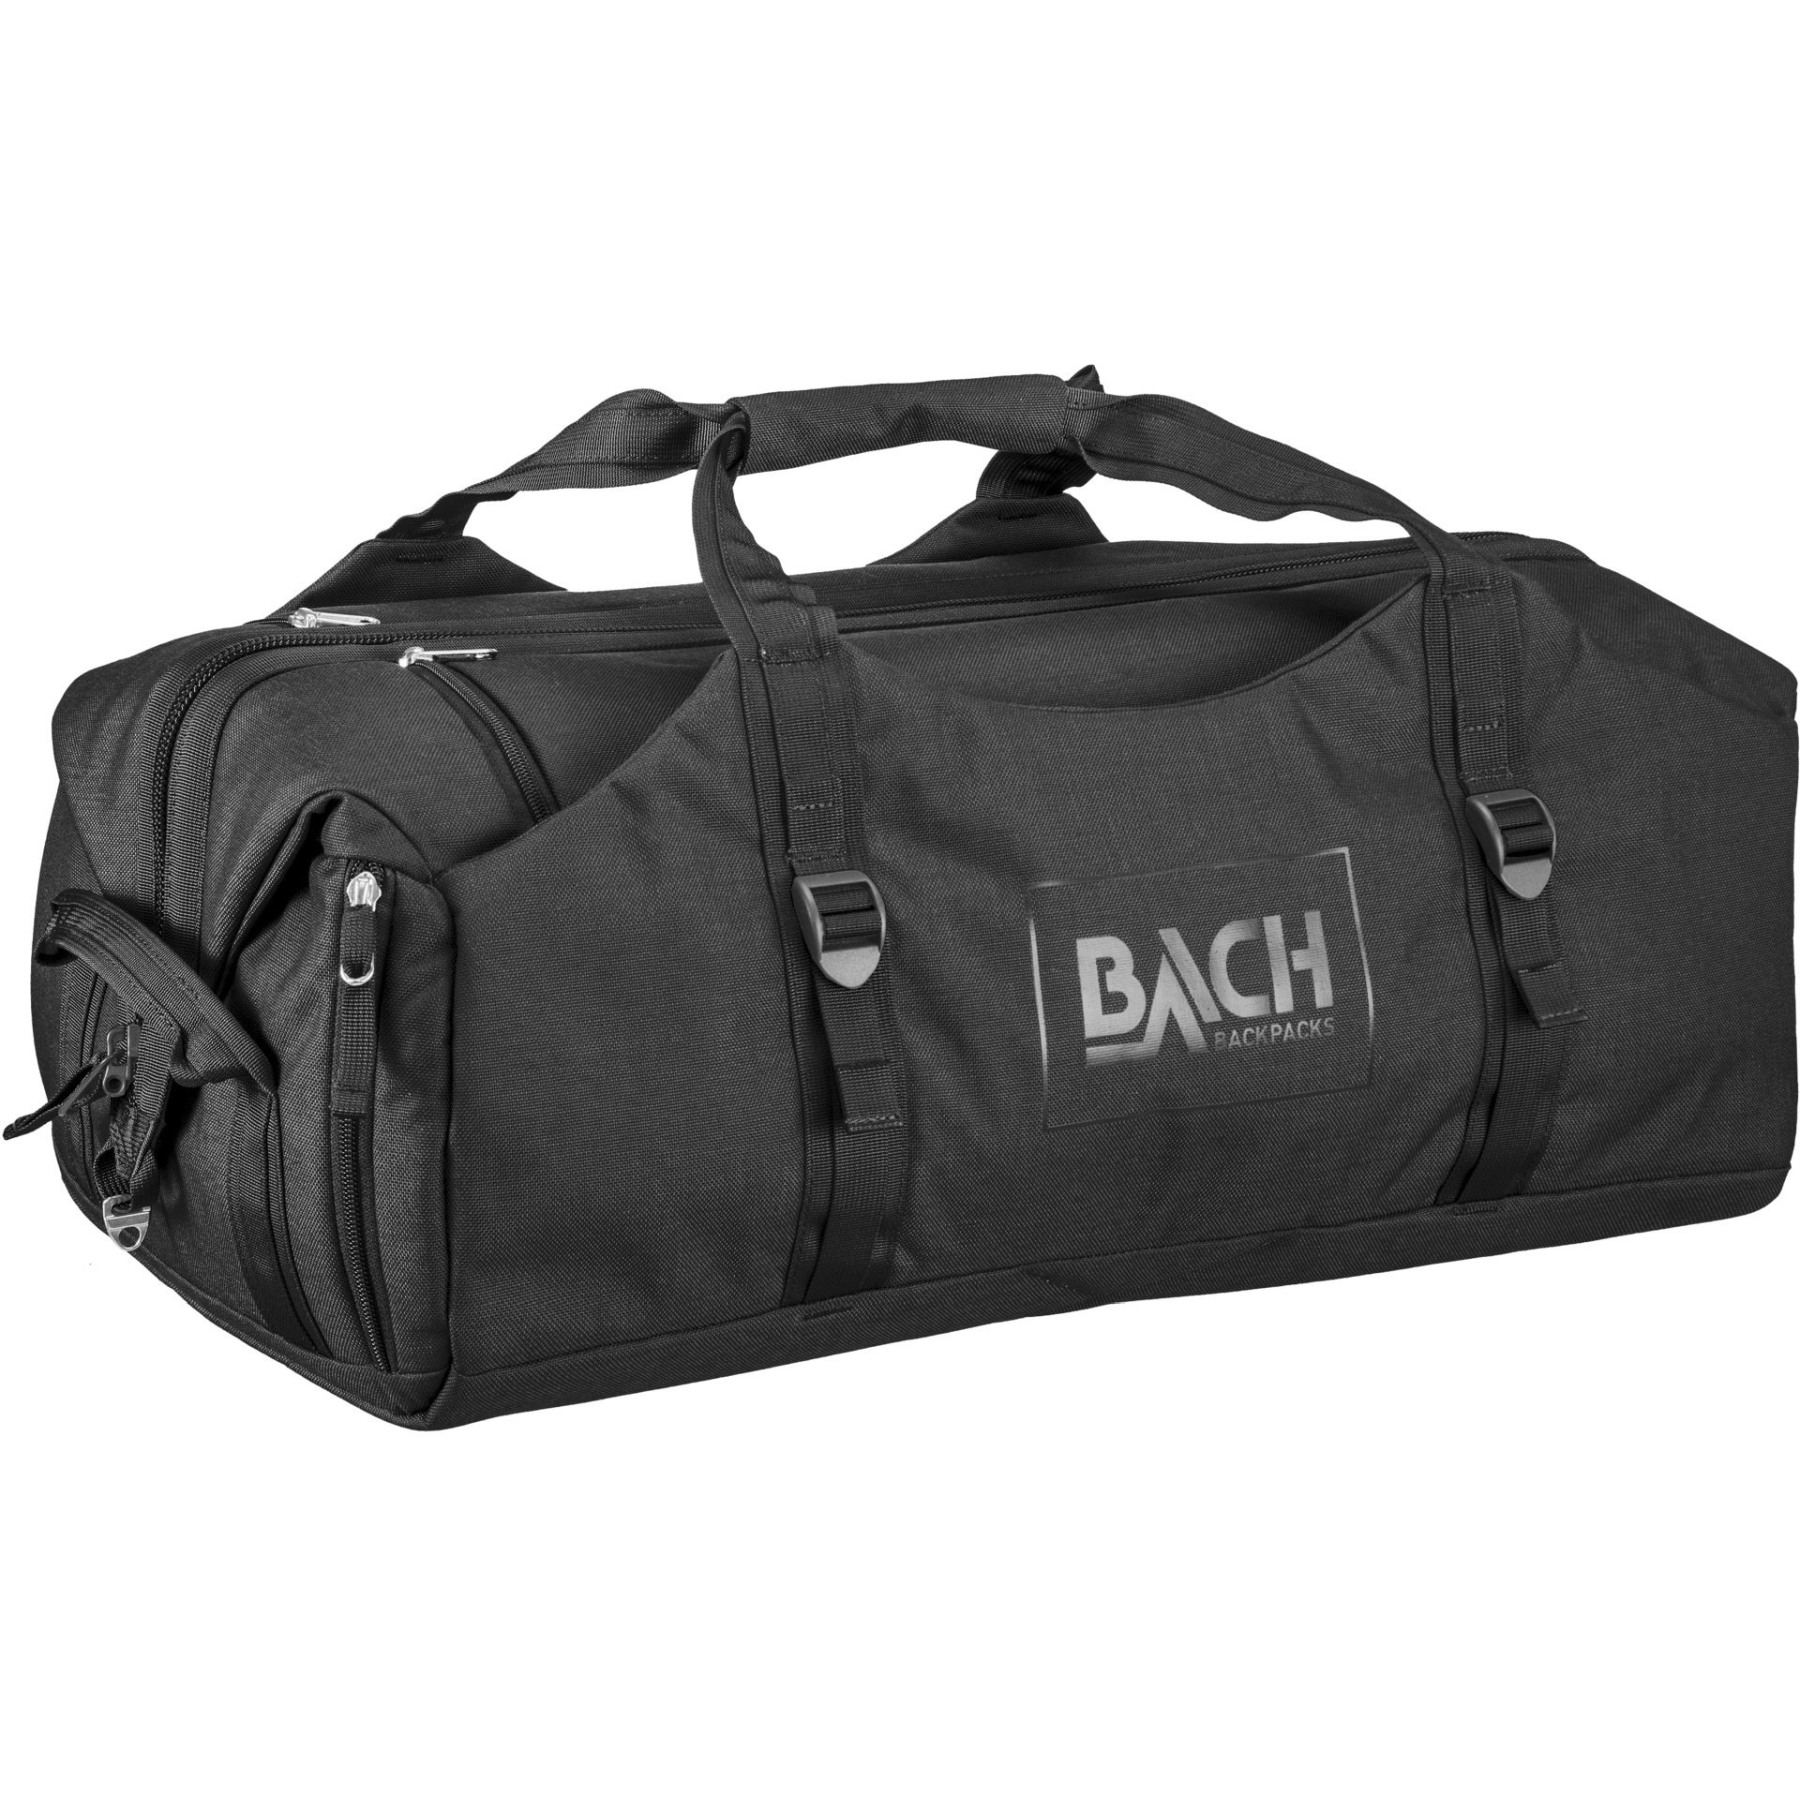 Picture of Bach Dr. Duffel 40 Travel Bag - black